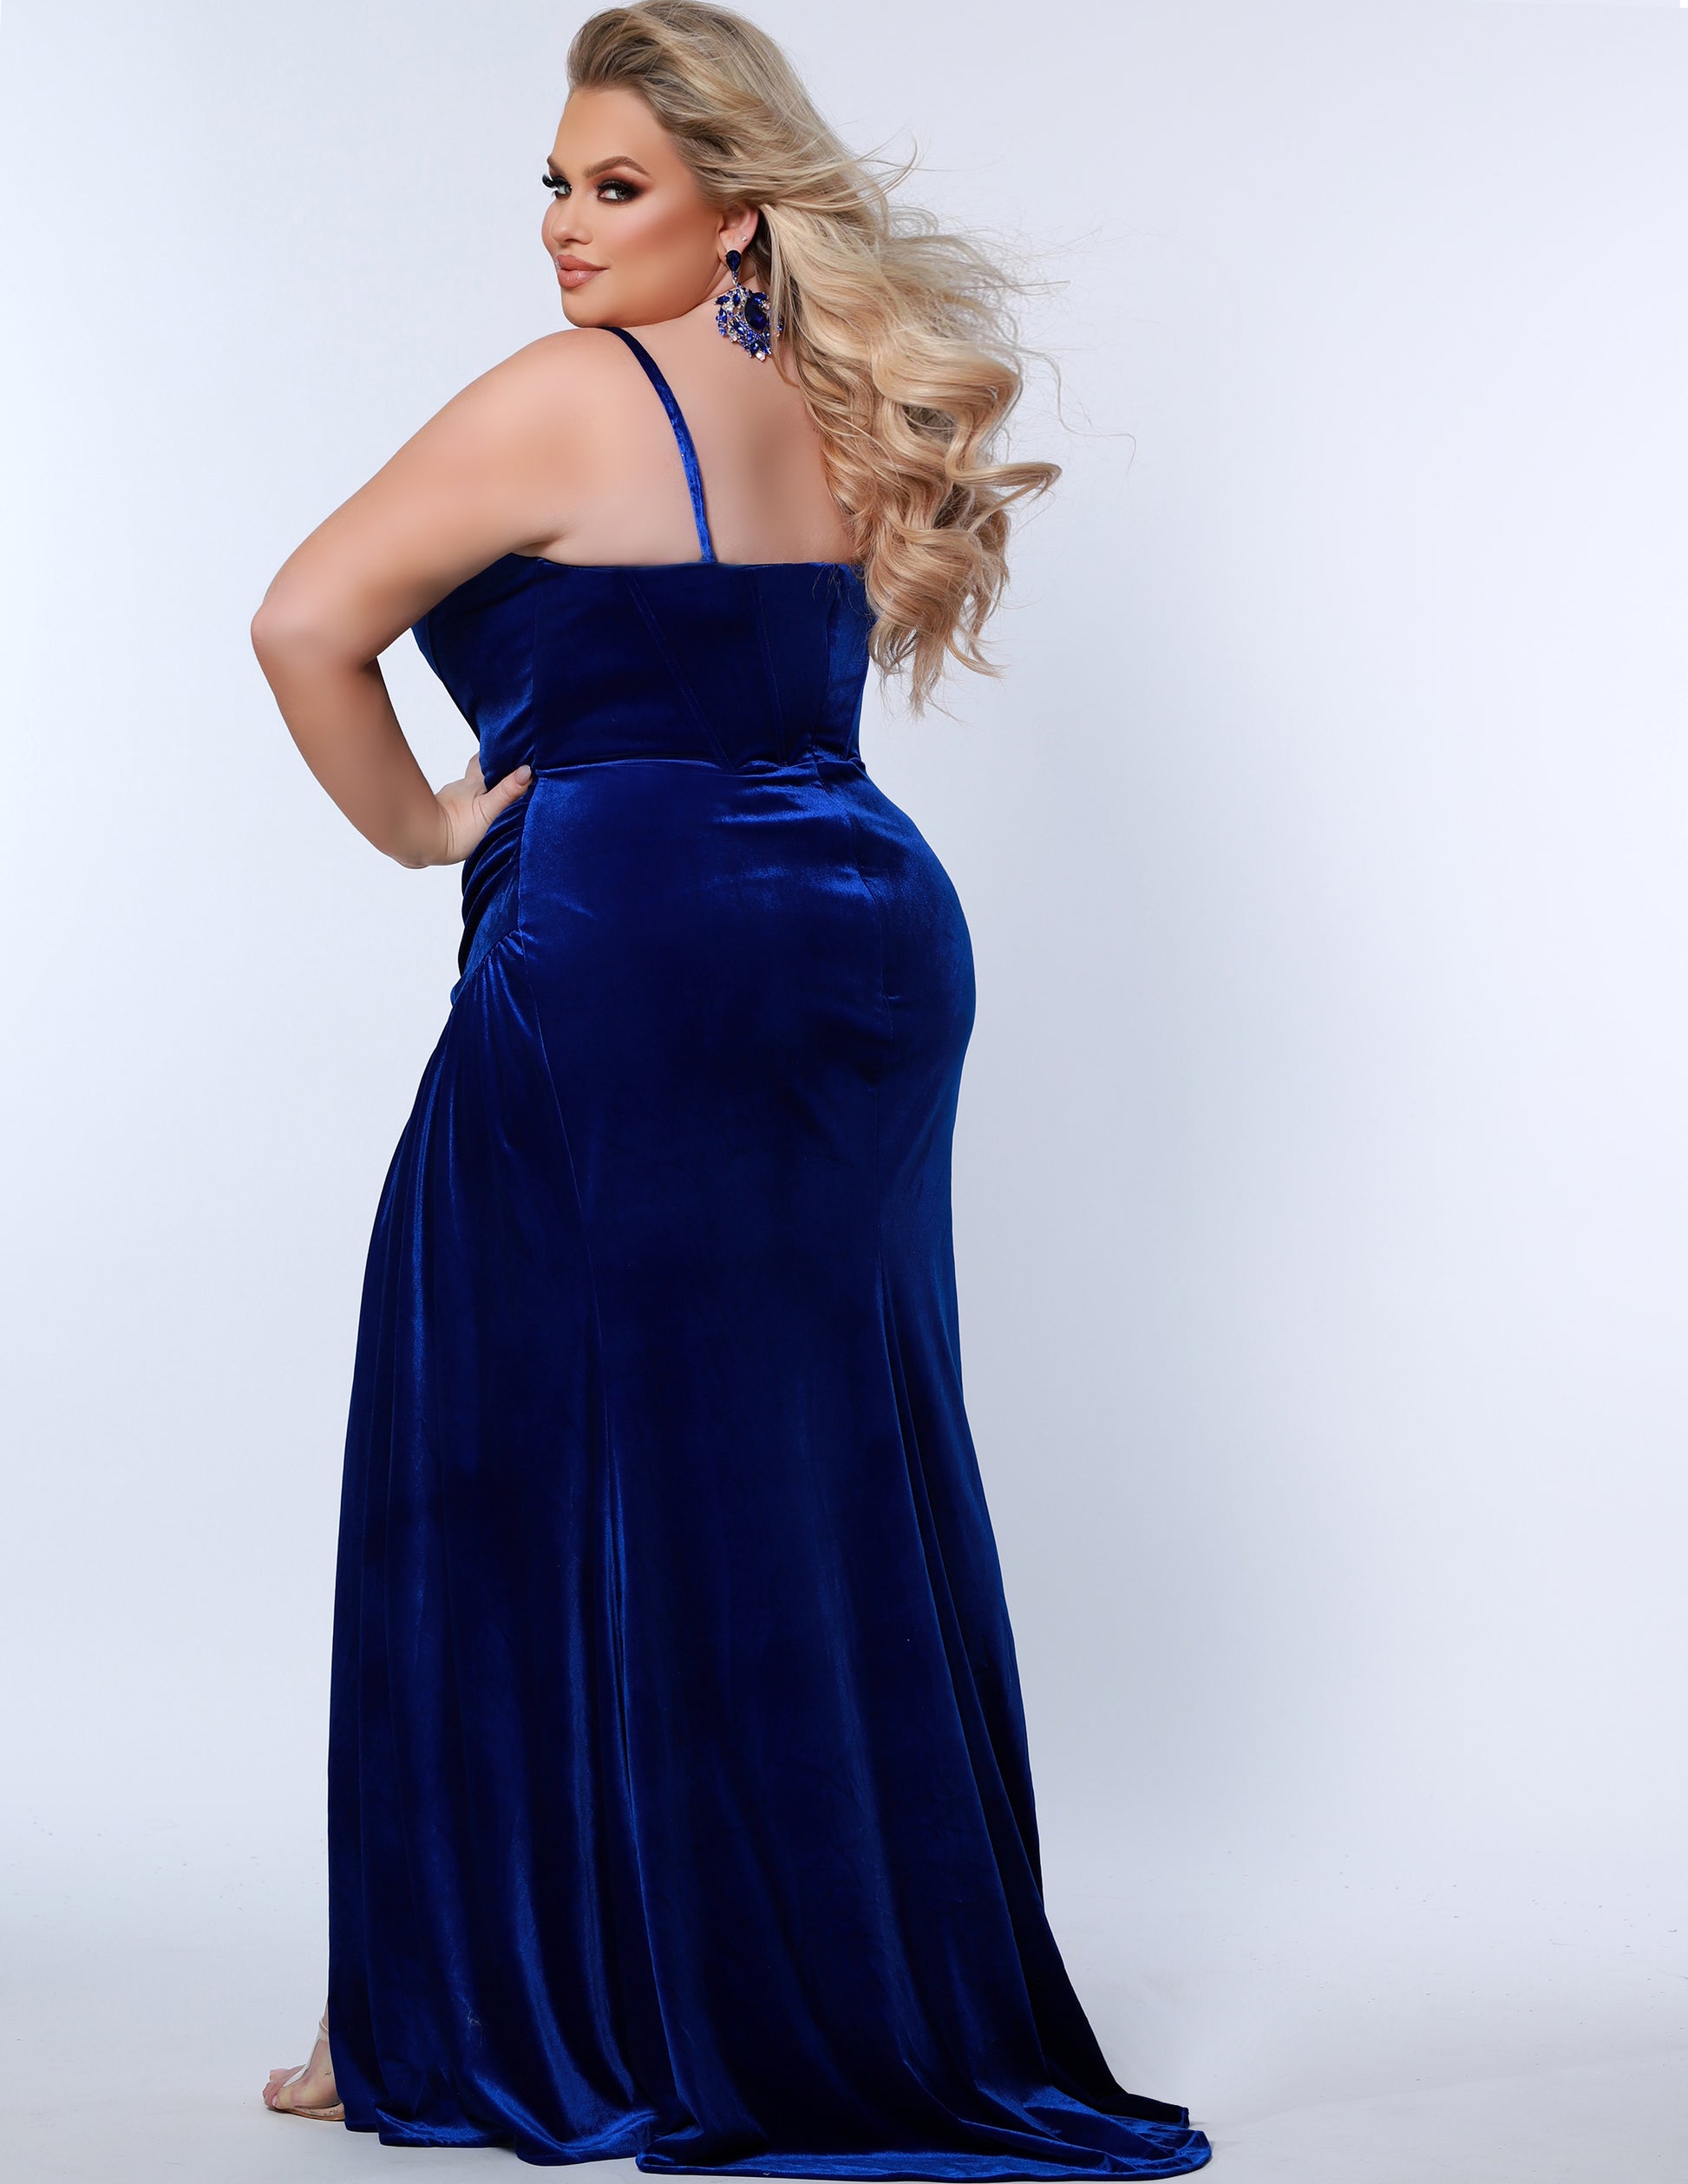 The Sydney's Closet SC7342 is a luxurious Velvet Prom Dress Strapless Evening Gown with a fitted and ruched silhouette, ideal for special occasions. It offers a classic and timeless look with a touch of sophistication. Its rich fabric provides a comfortable fit and feel.